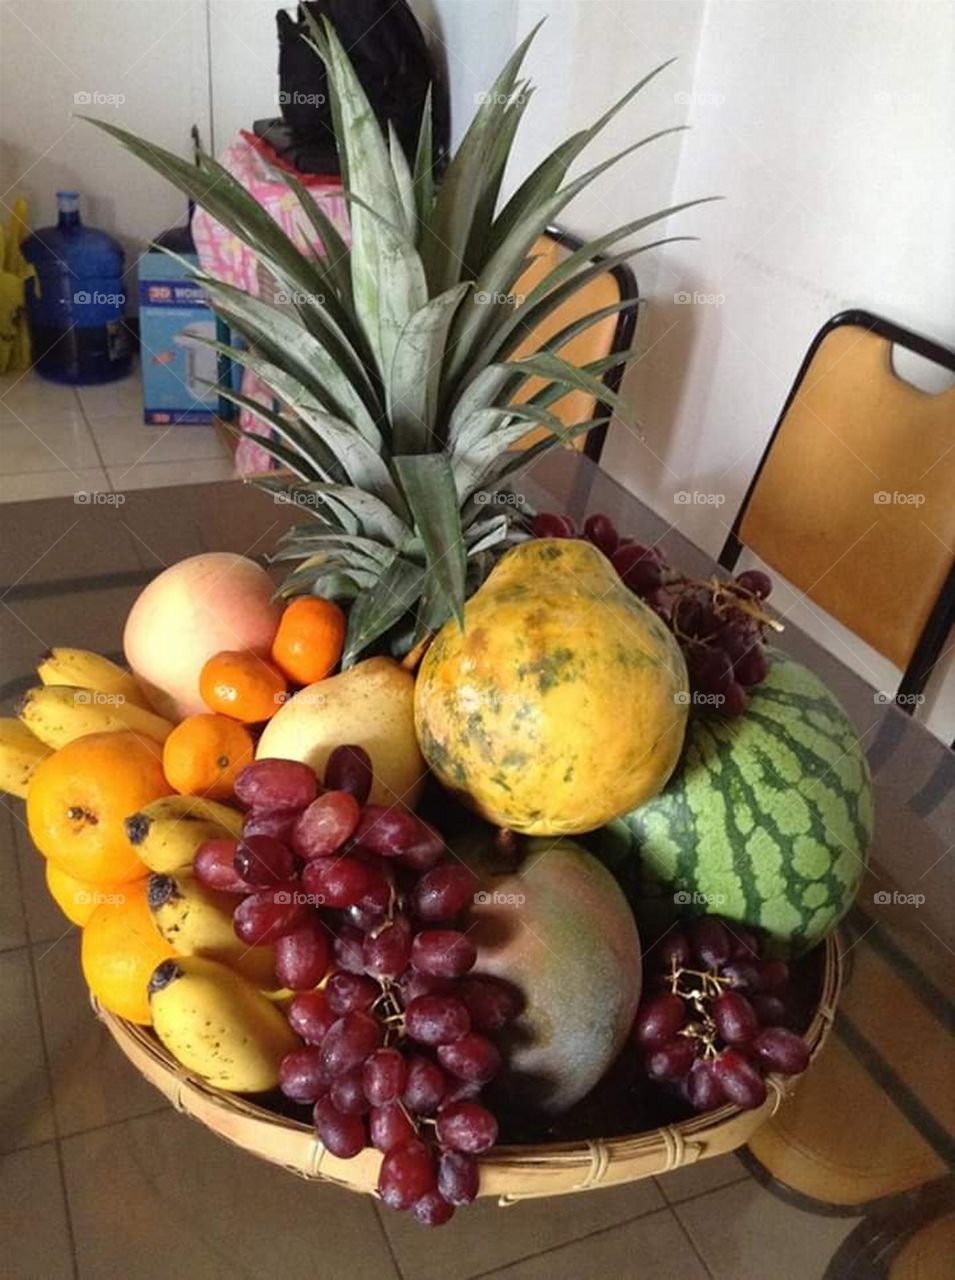 The Fruit Variety on the Table